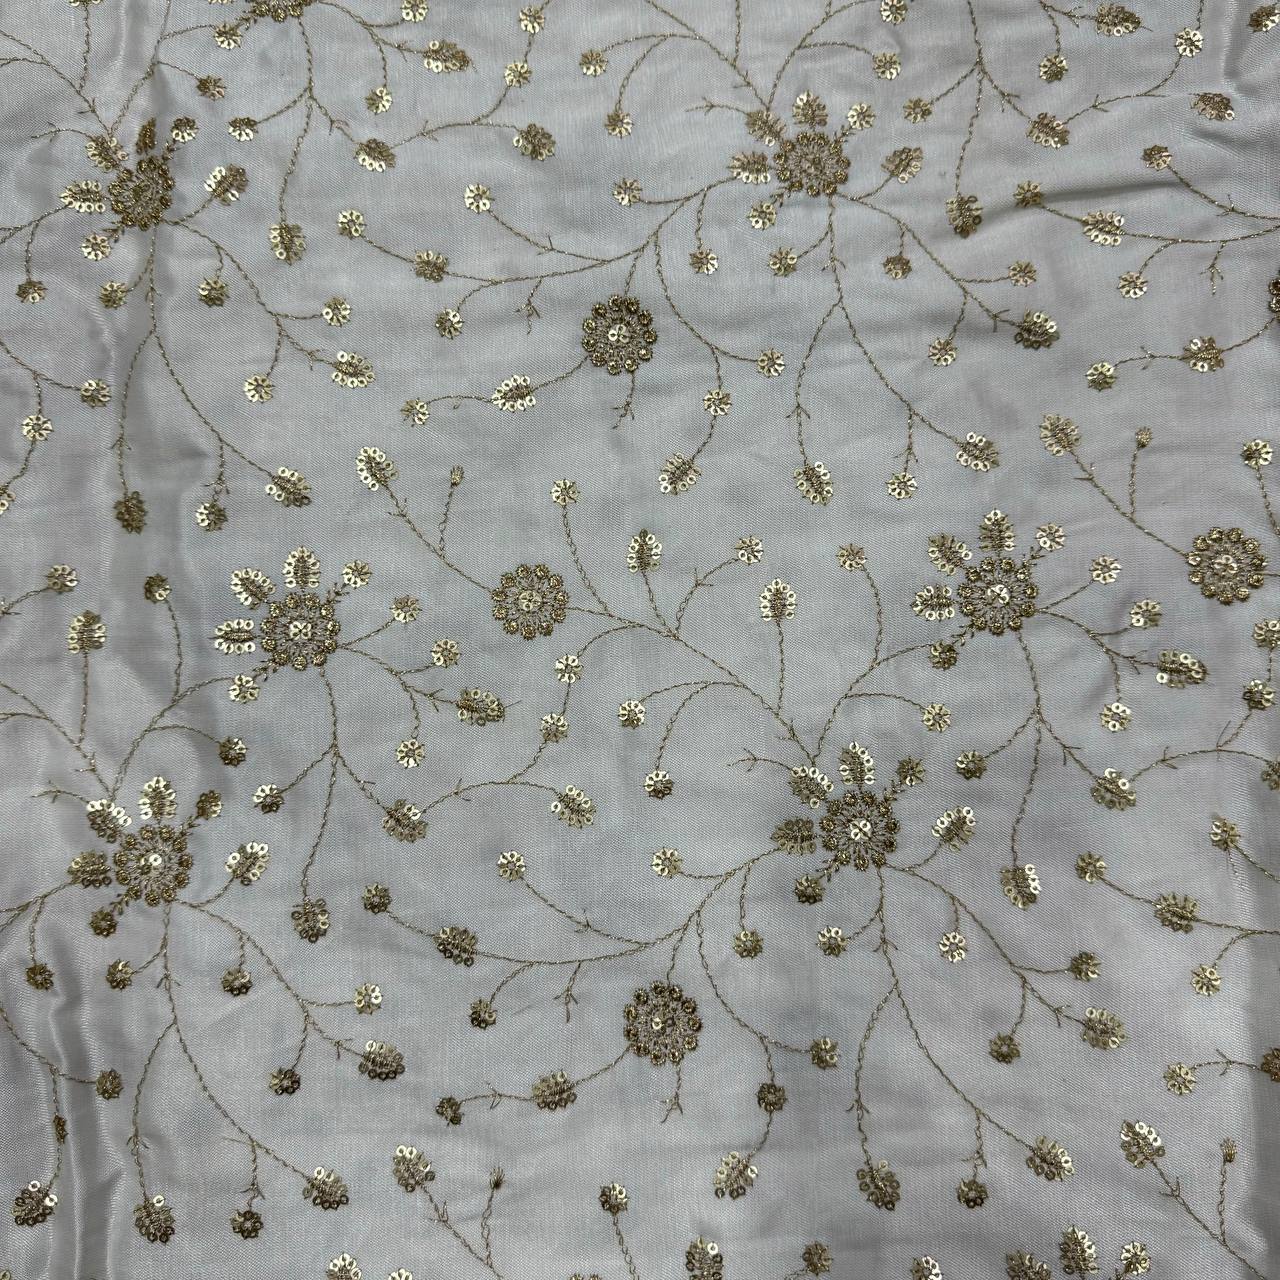 White & Golden Floral Dyeable Embroidered Viscose Gaji Silk Fabric